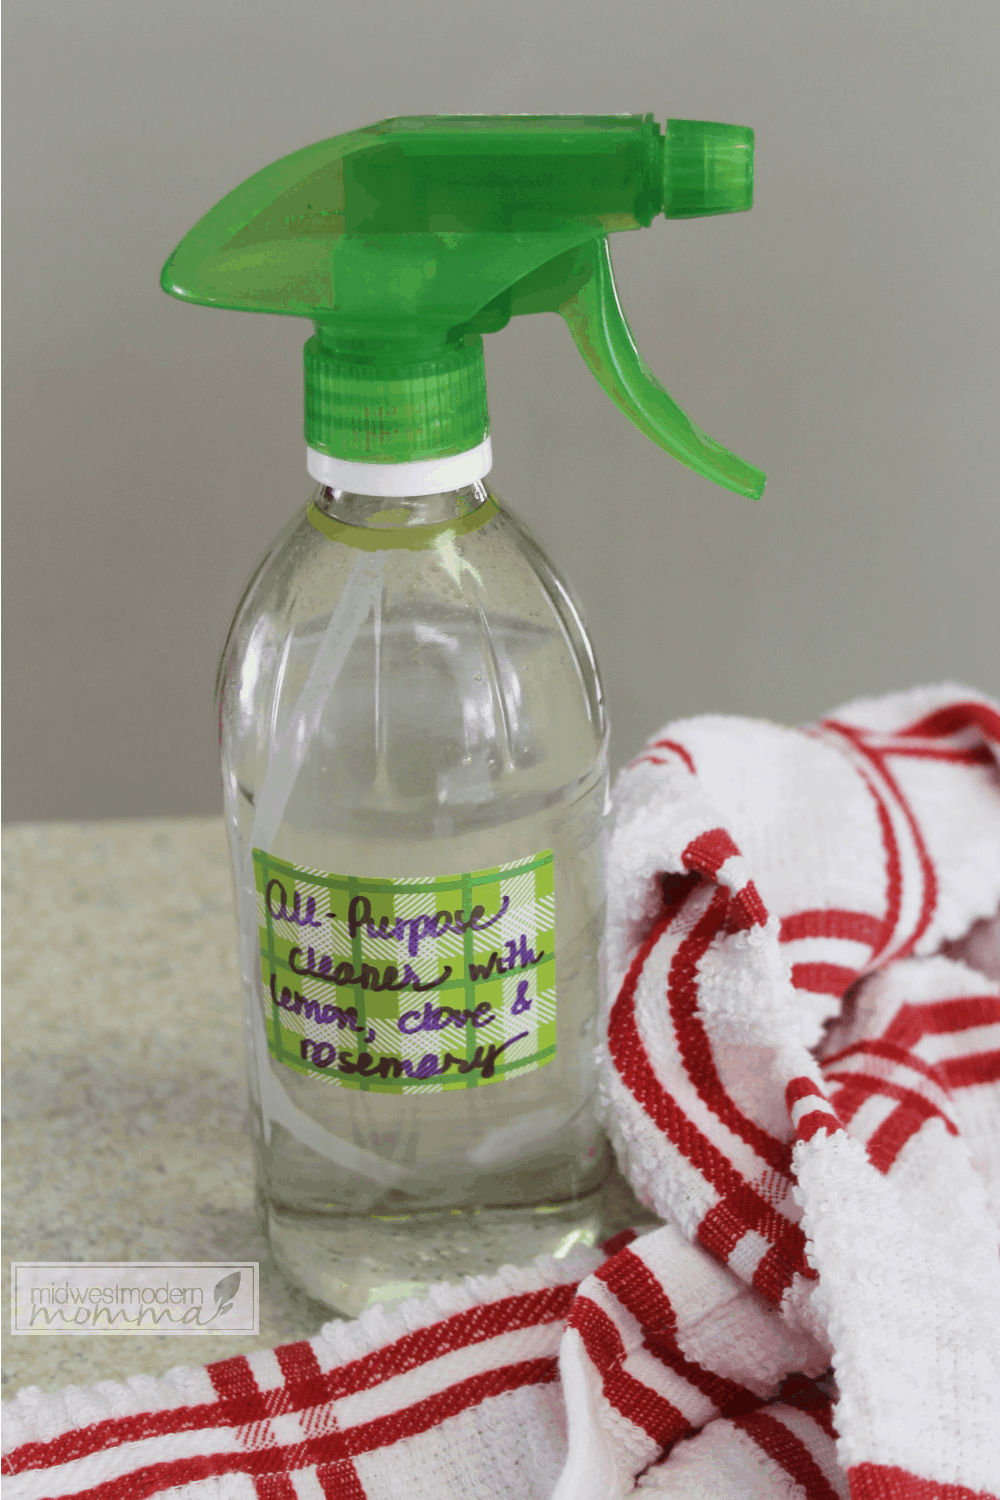 Homemade Cleaners: All Purpose Cleaning Spray